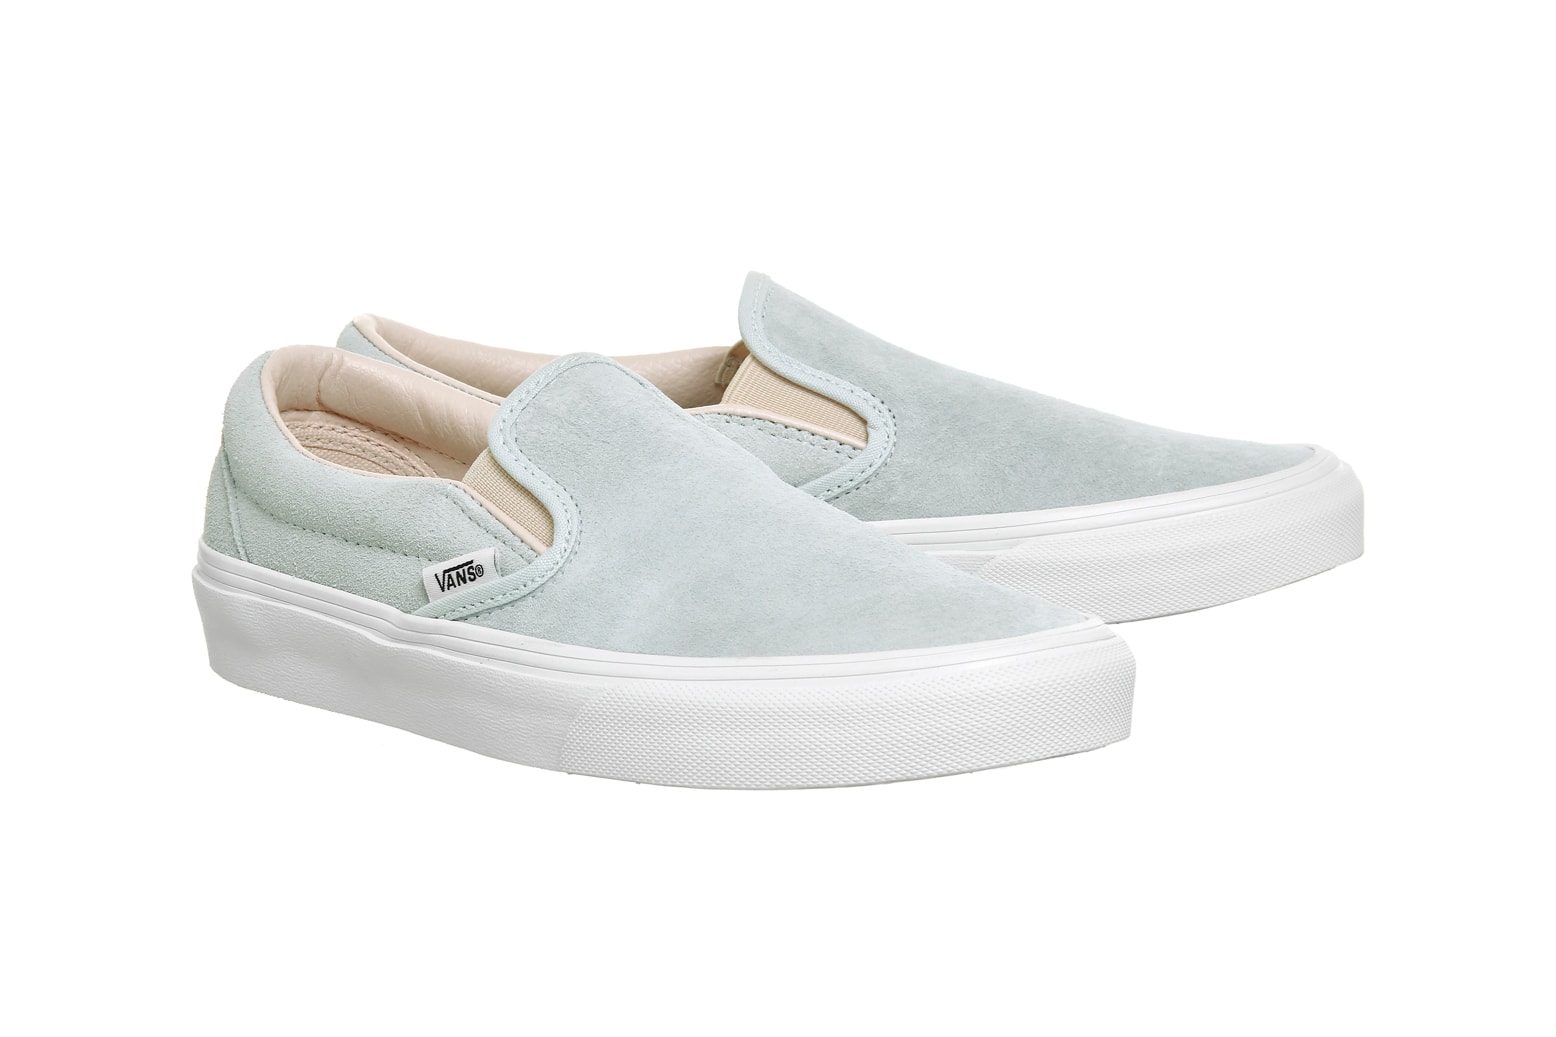 Vans Slip On Illusion Blue Silver Peony Suede